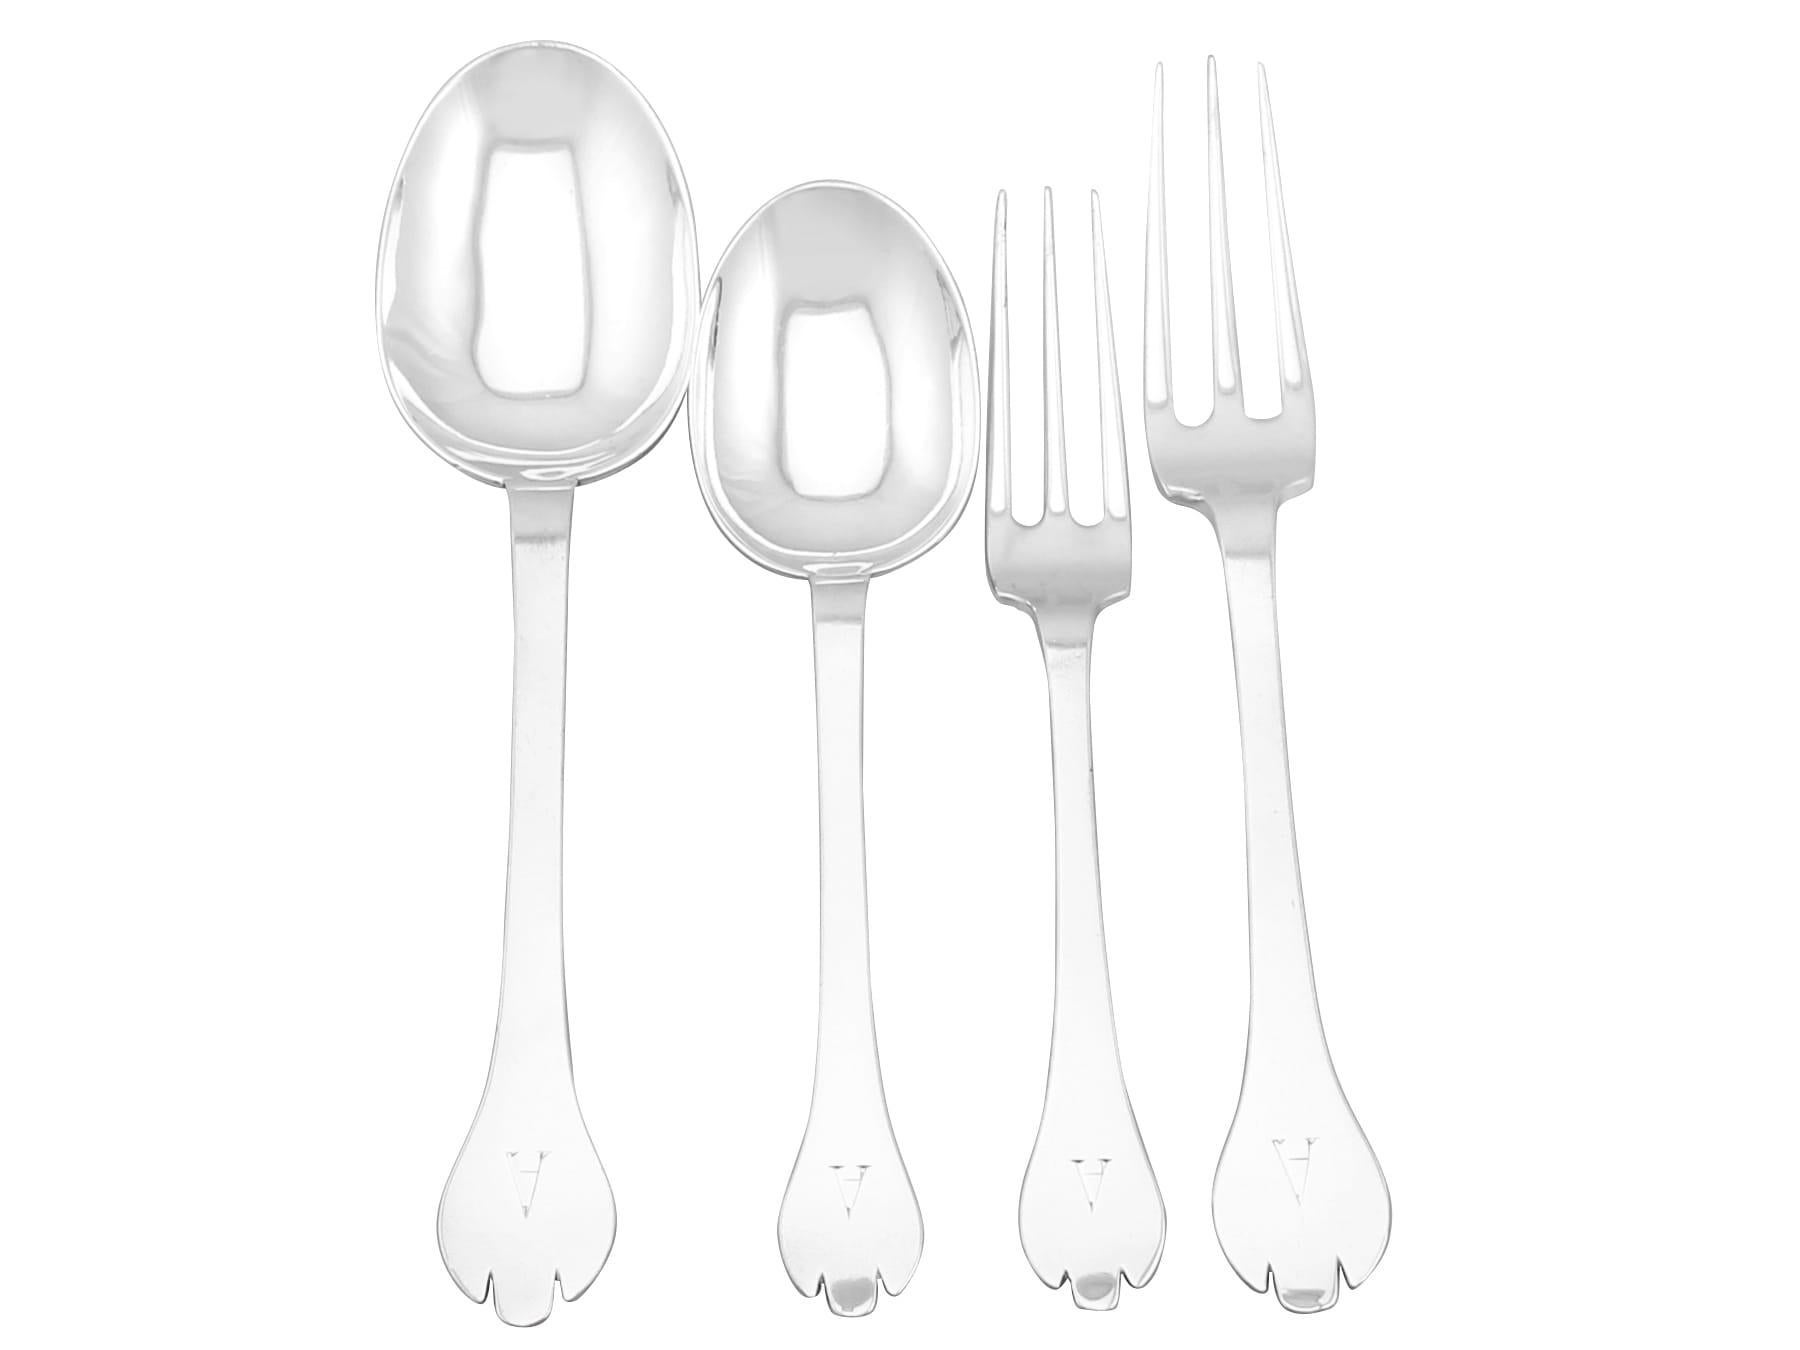 An exceptional, fine and impressive antique George V English sterling silver straight Trefid pattern flatware service for ten persons; an addition to our antique flatware sets

The pieces of this exceptional antique George V sterling silver 10